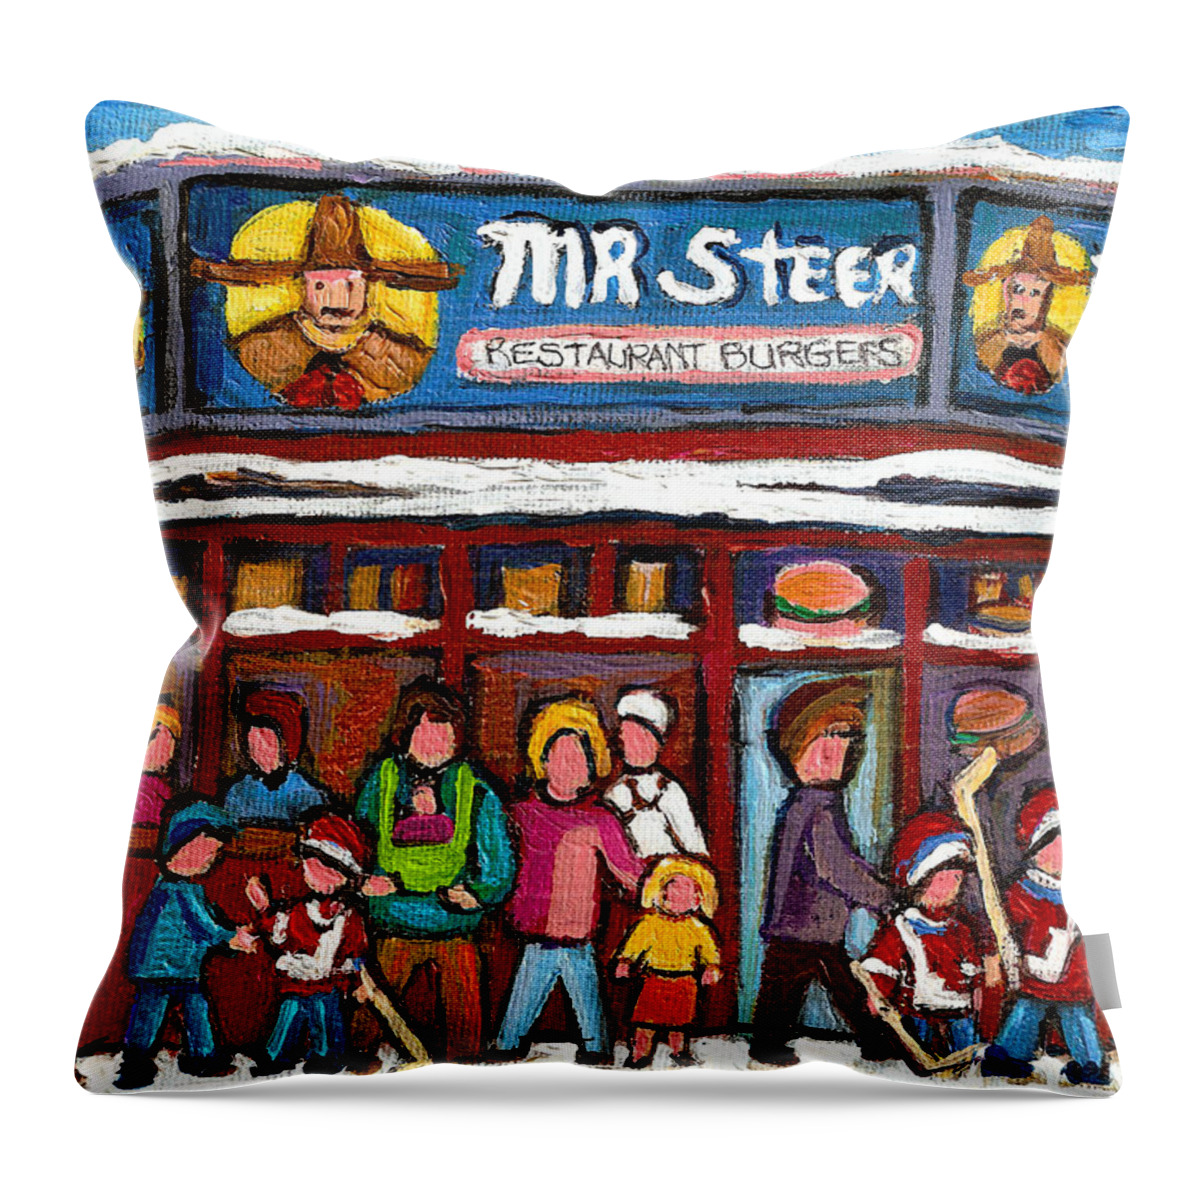 Mr.steer Restaurant Montreal Restaurants Throw Pillow featuring the painting Mr Steer Restaurant Montreal by Carole Spandau